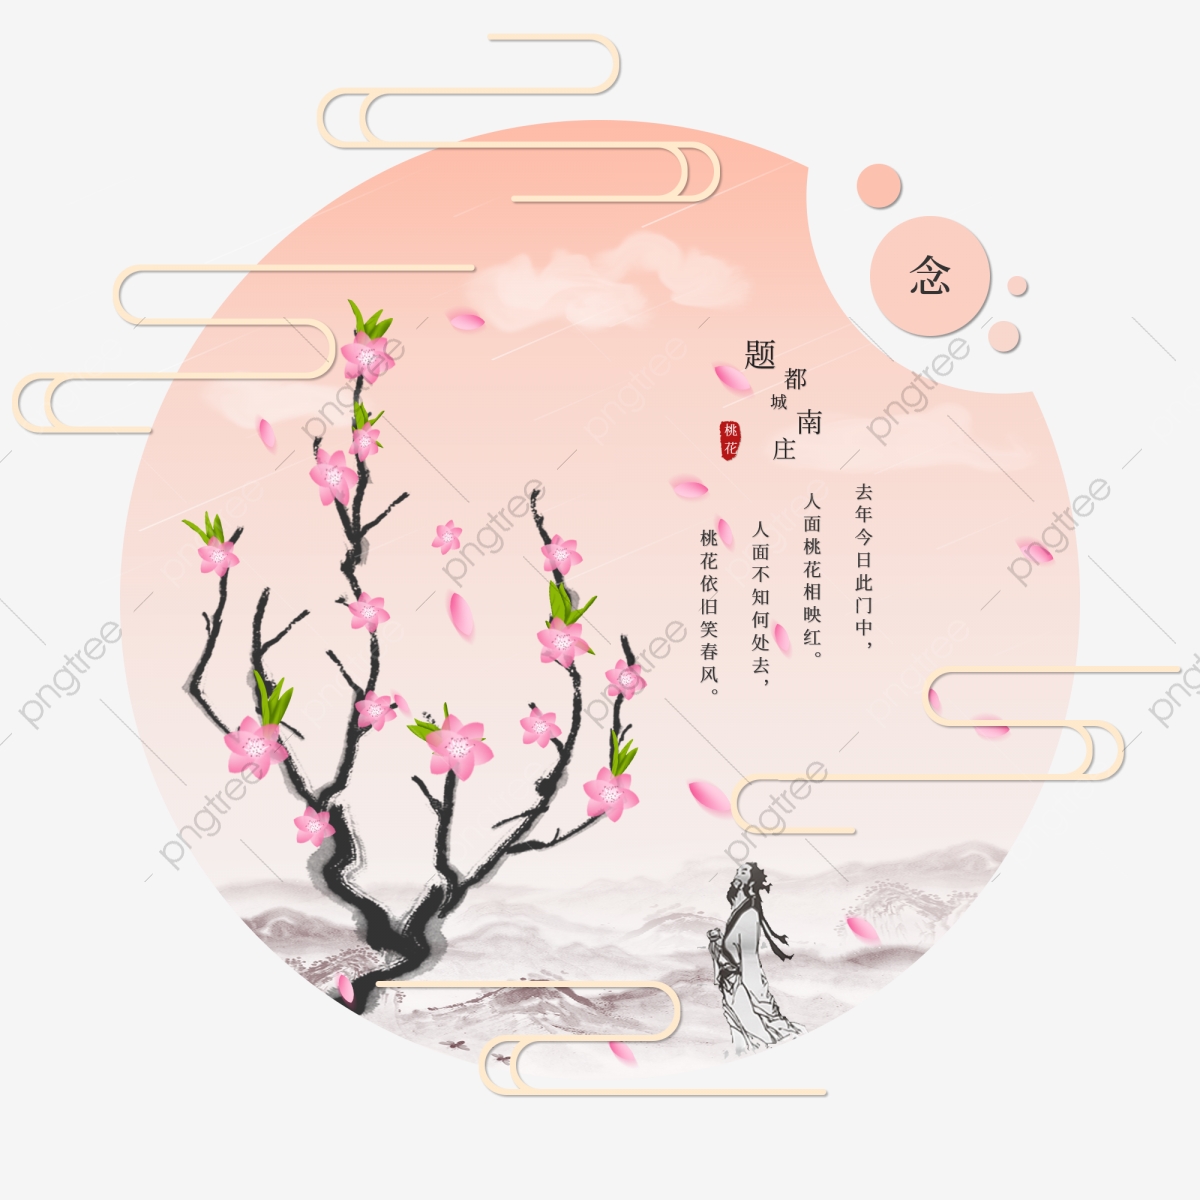 pngtree-hand-painted-flower-peach-verse-chinese-style-ancient-poetic-ink-painting-png-image_40...jpg